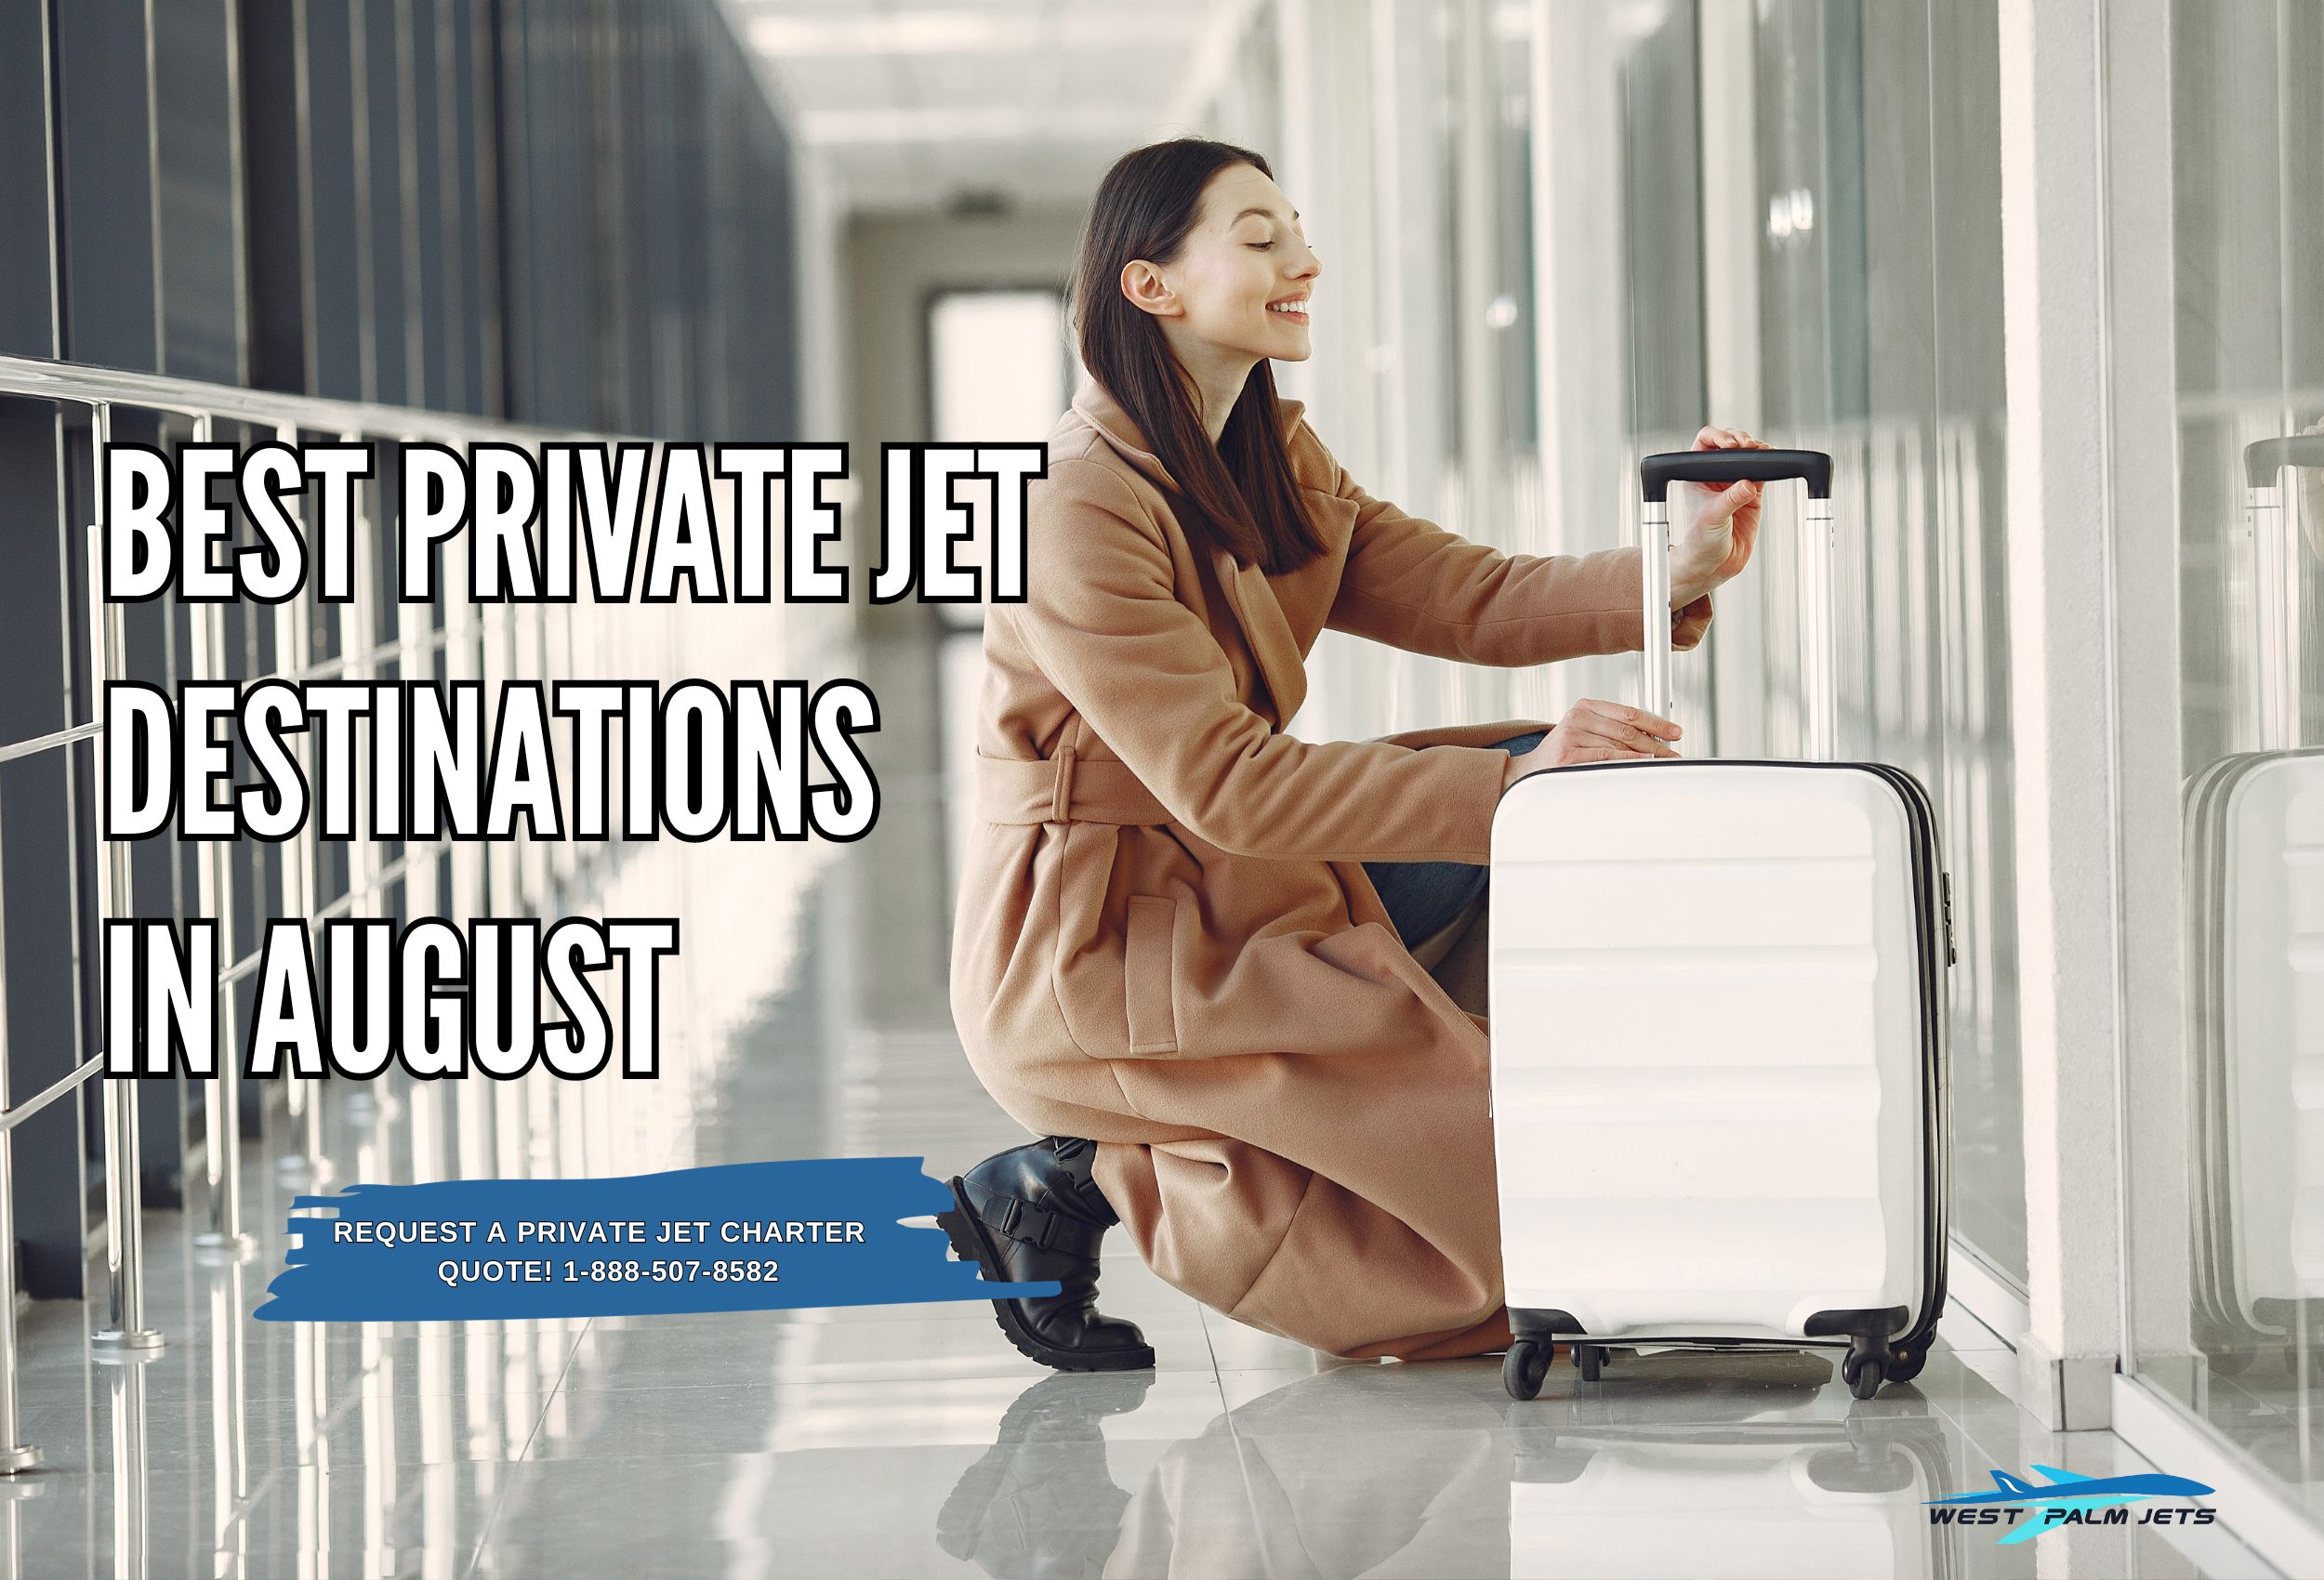 Best Private Jet Destinations in August